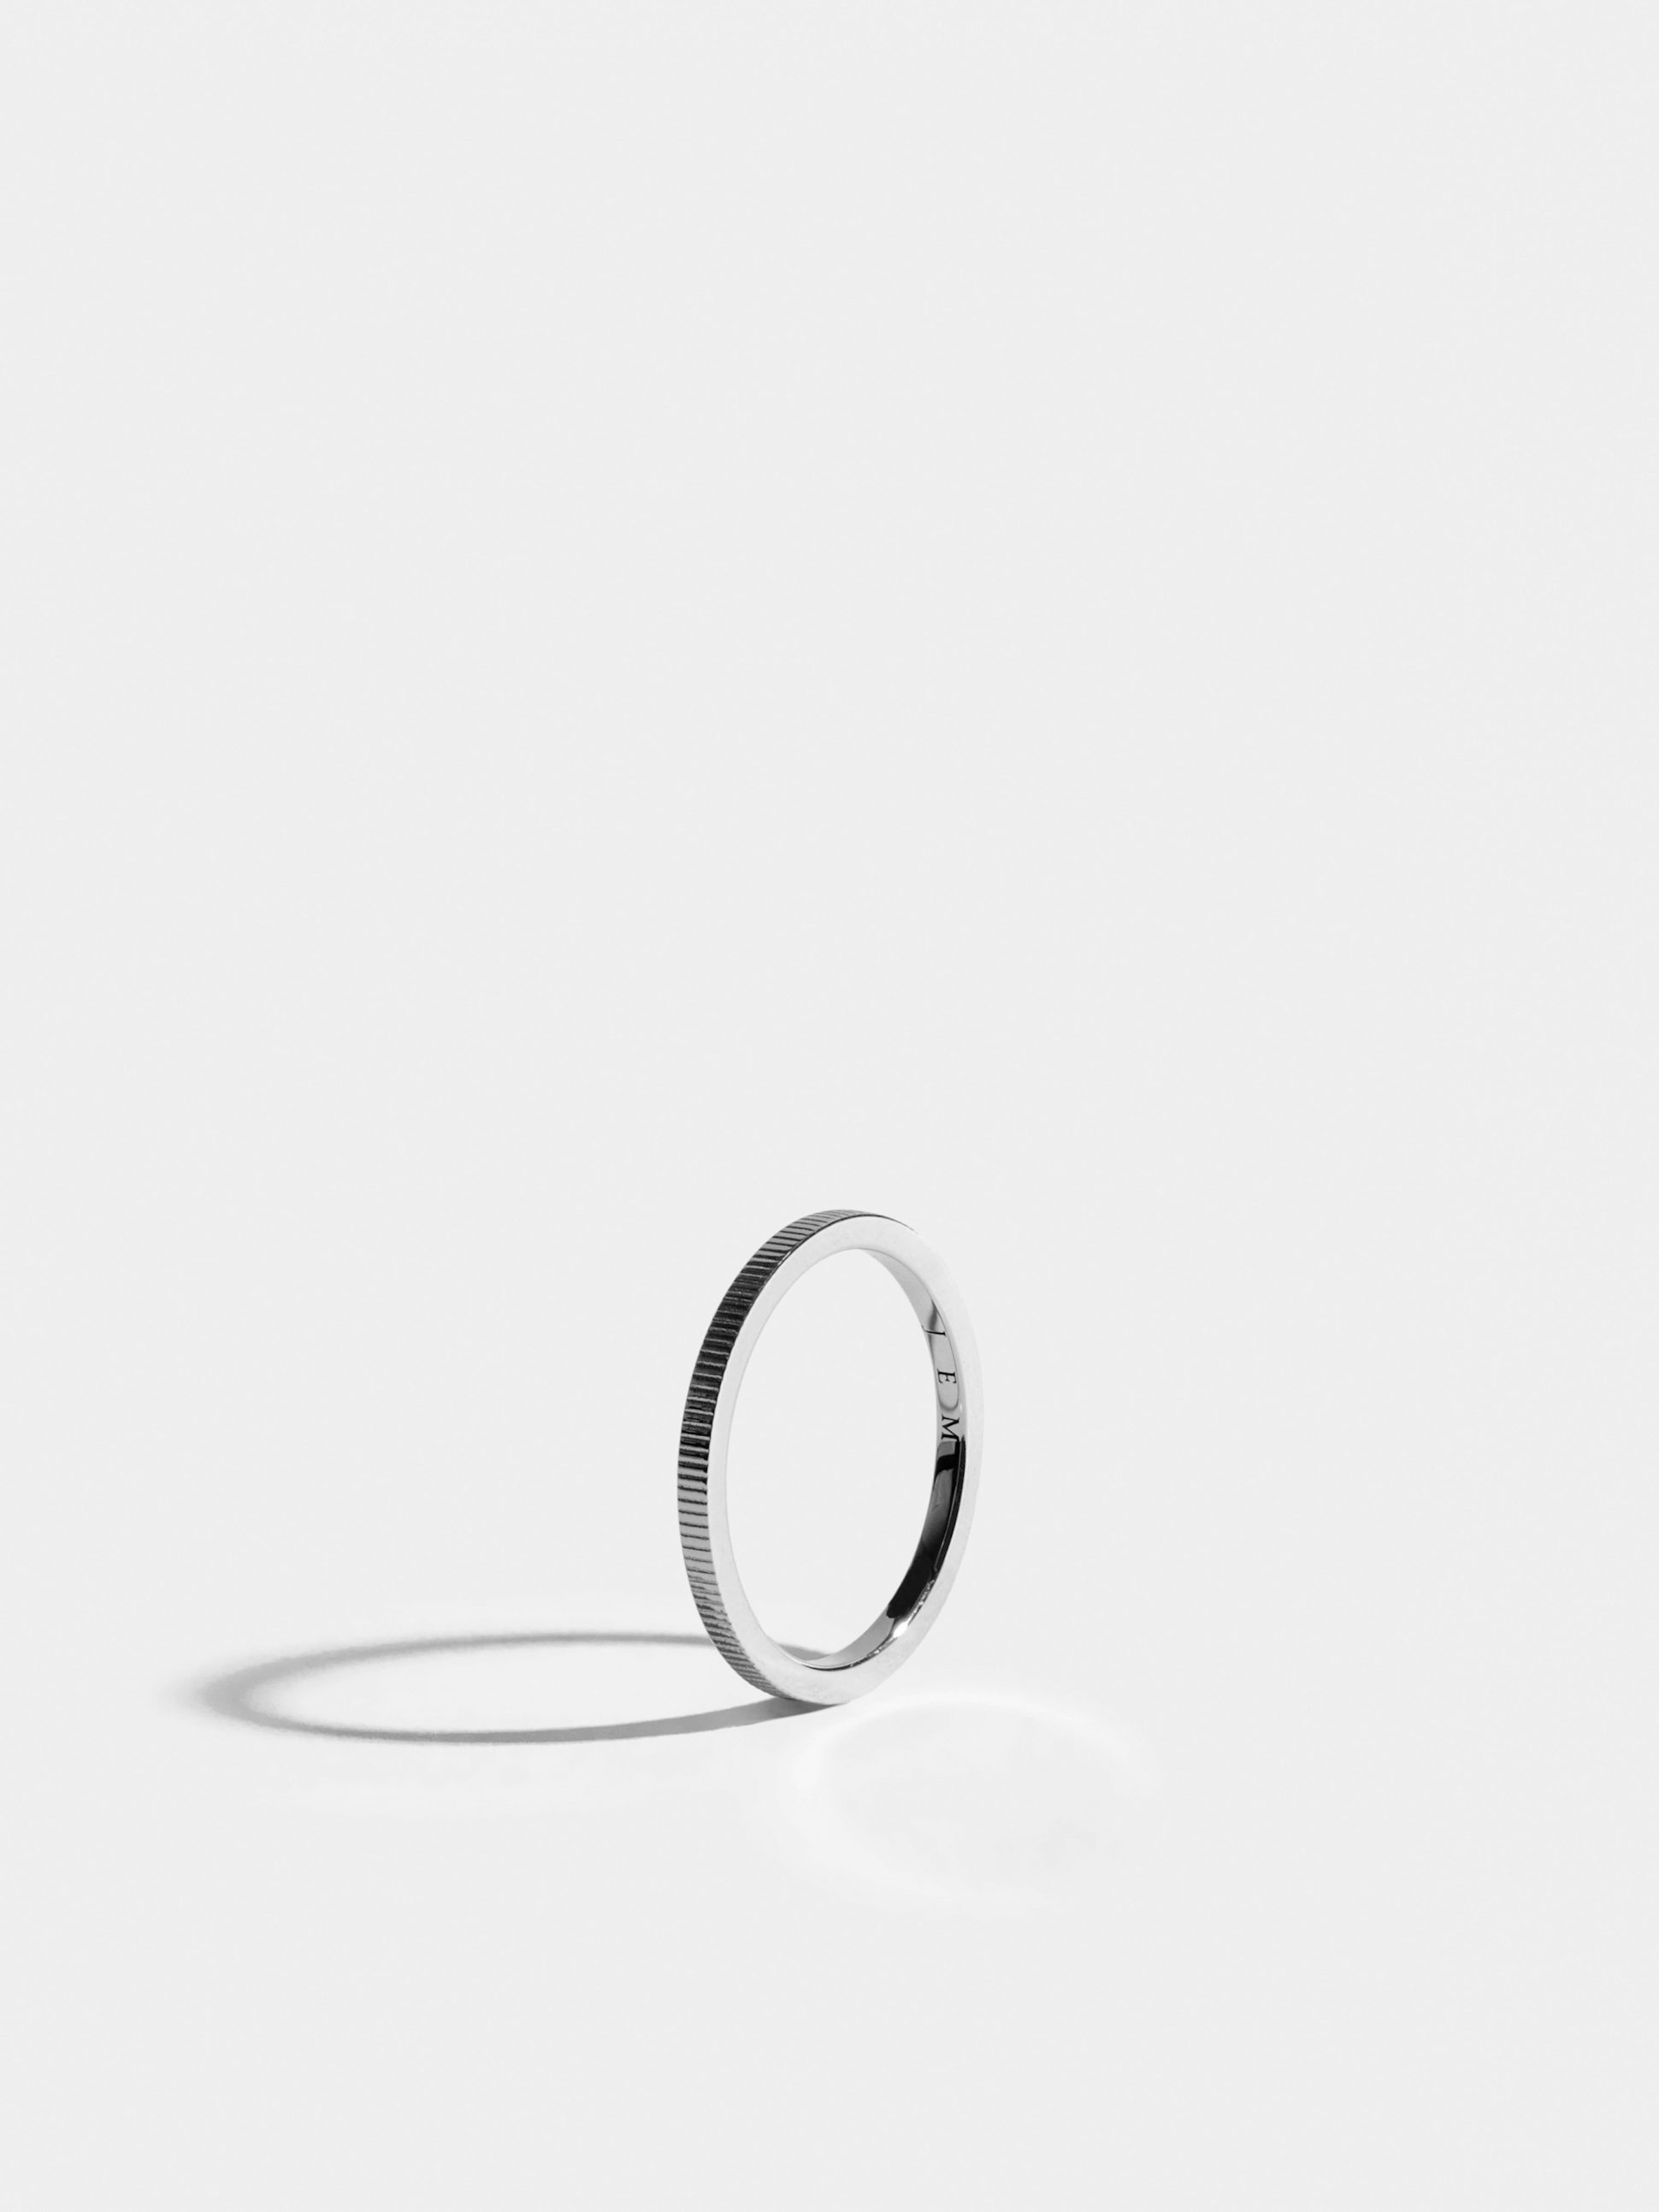 Anagramme ridges ring in 18k Fairmined ethical white gold